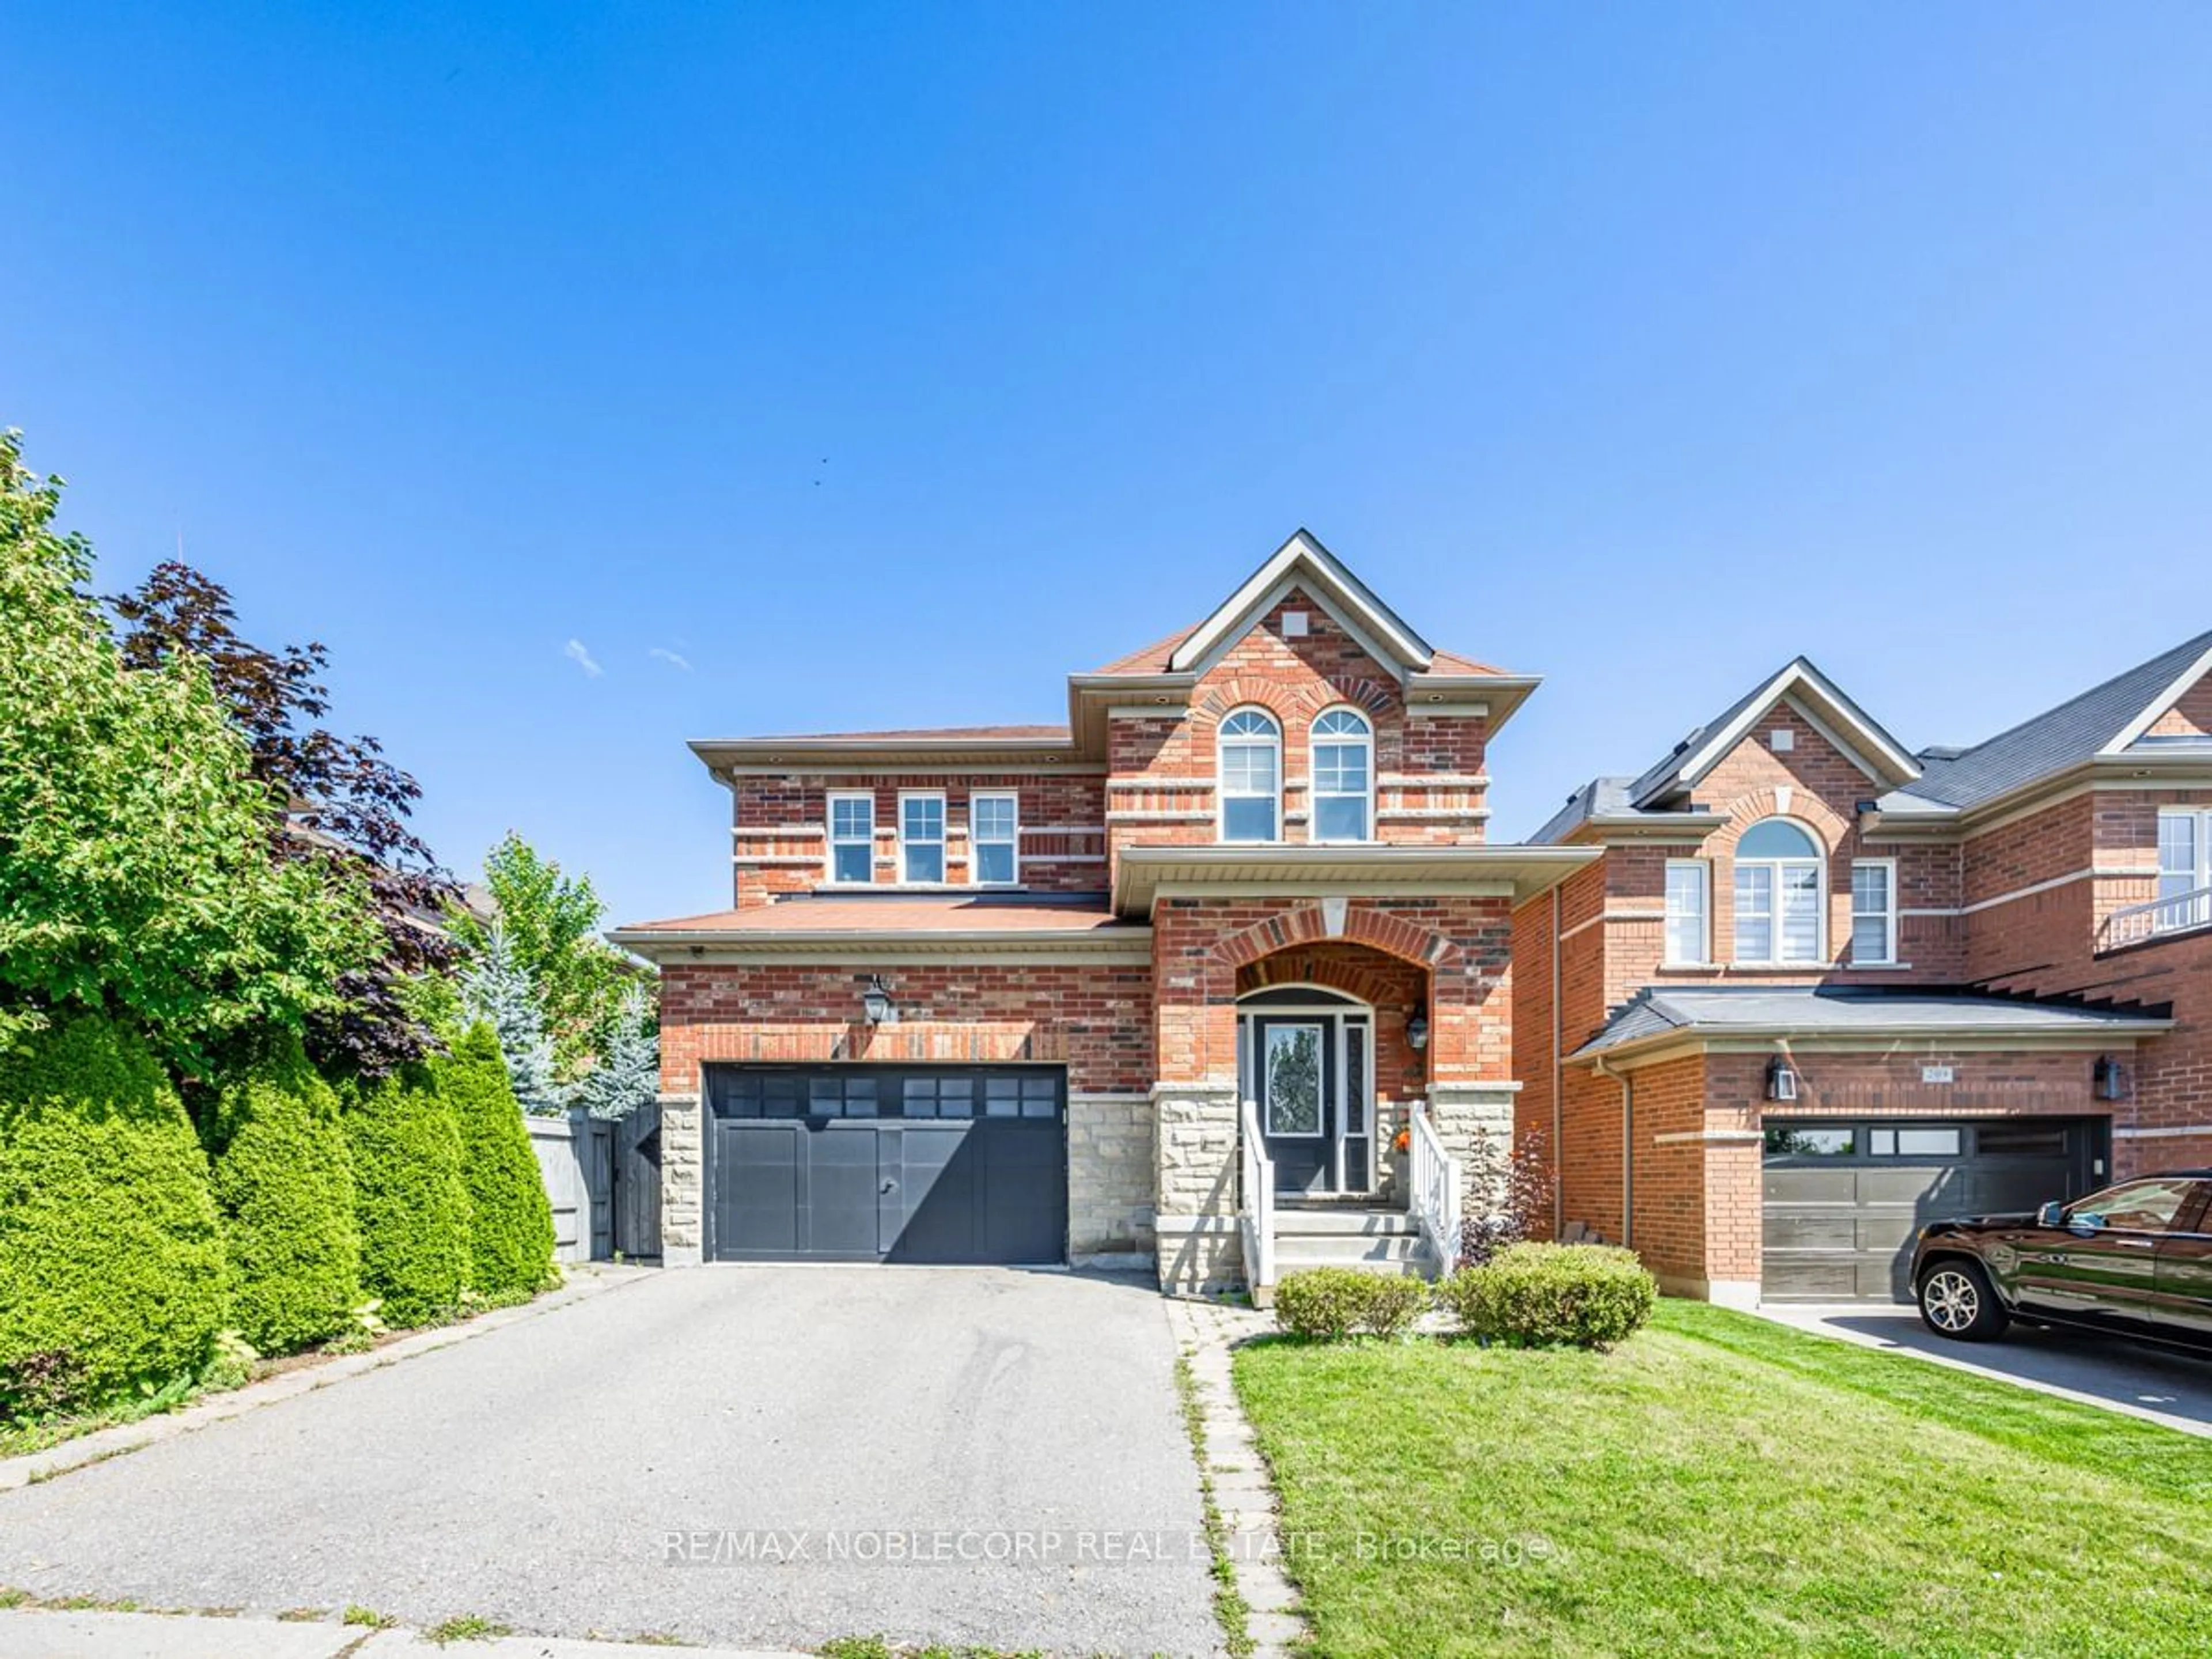 Home with brick exterior material for 211 Sir Benson Dr, Vaughan Ontario L6A 4B2